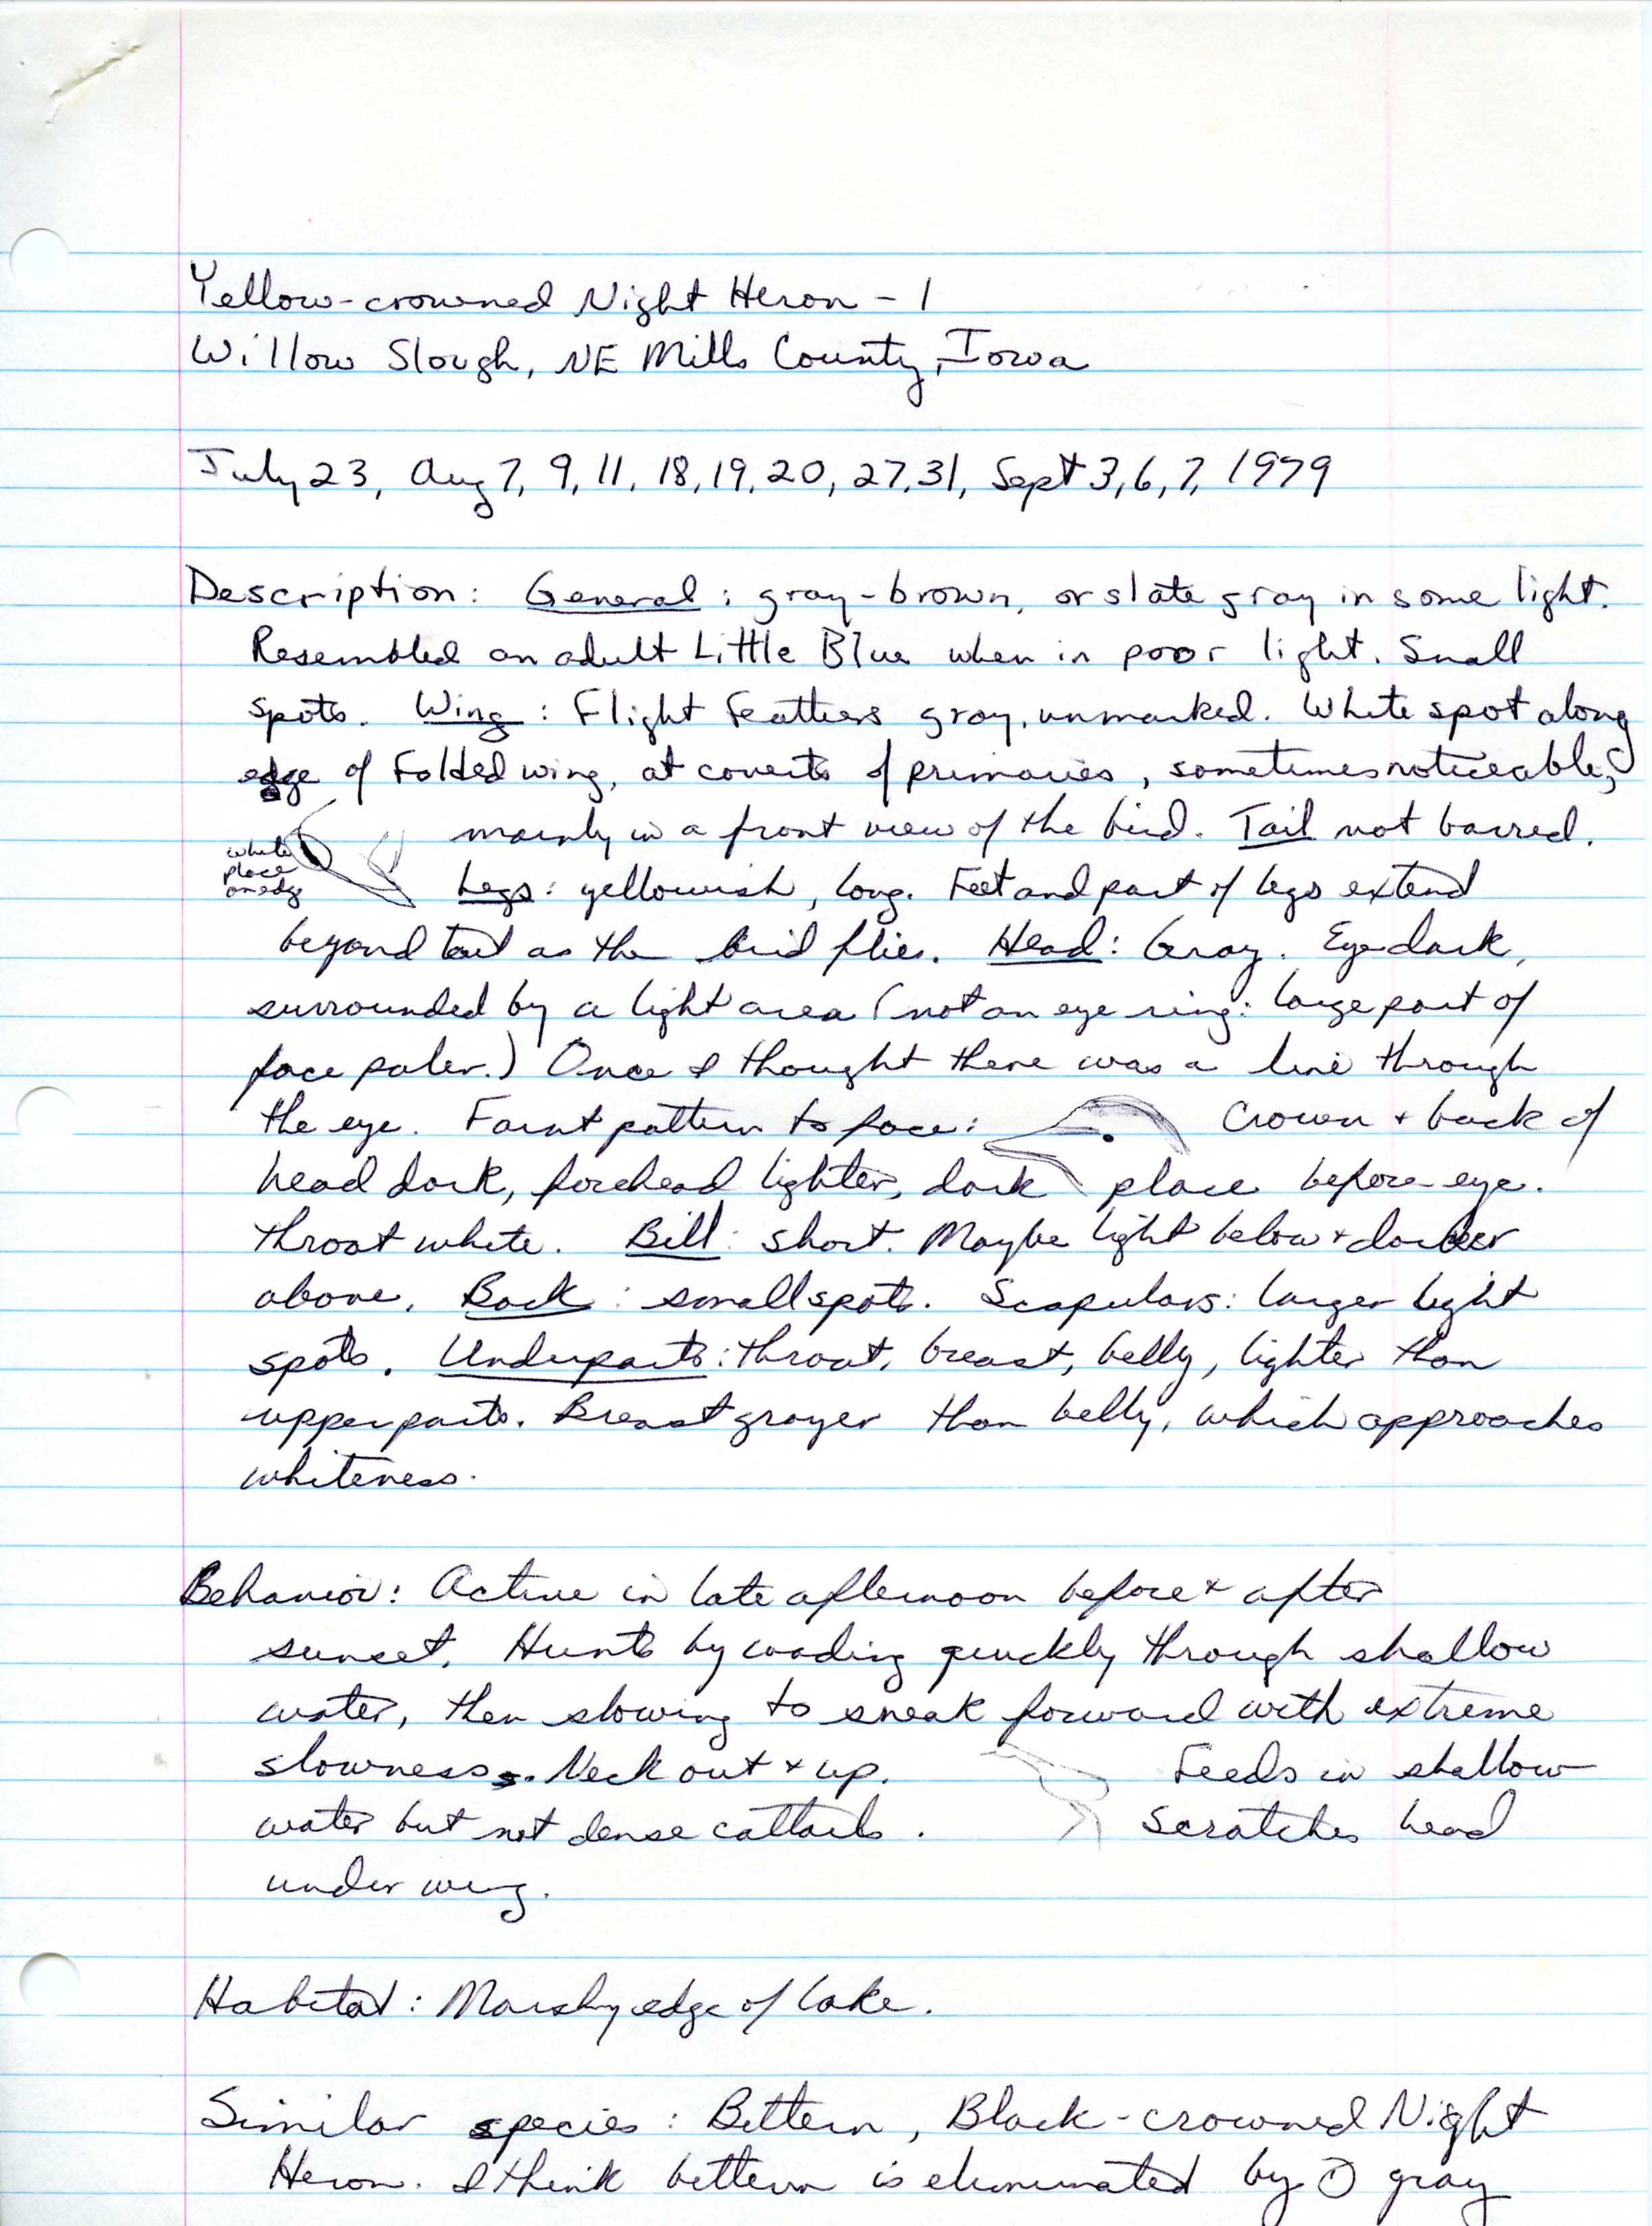 Rare bird documentation for Yellow-crowned Night Heron at Willow Slough, November 30, 1979